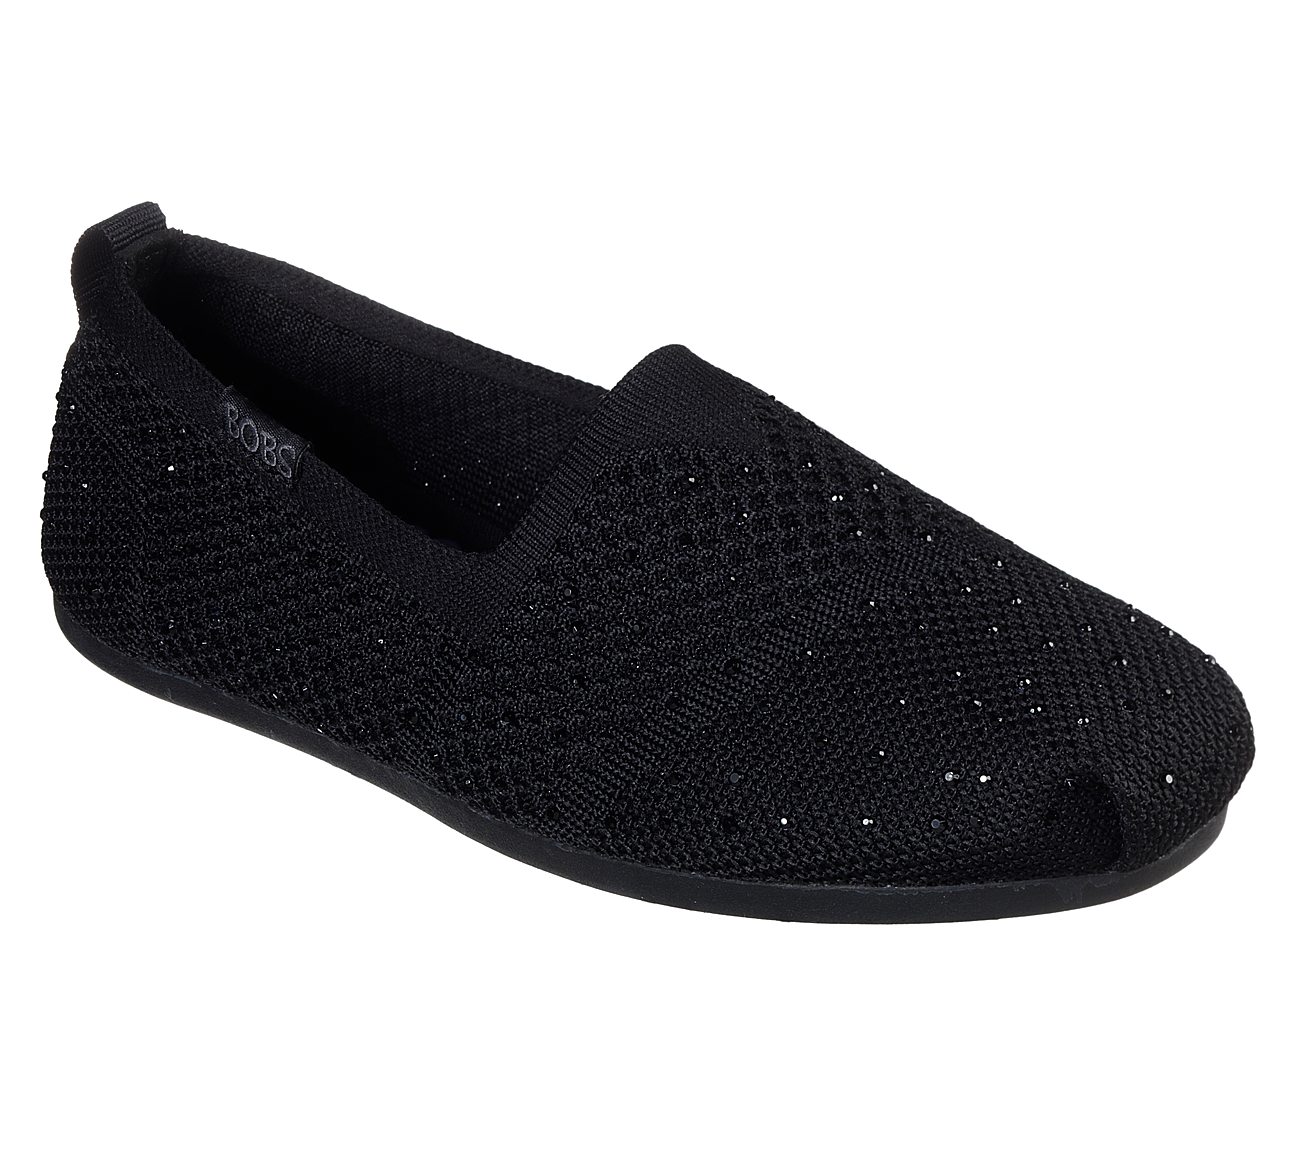 stretch knit shoes from skechers